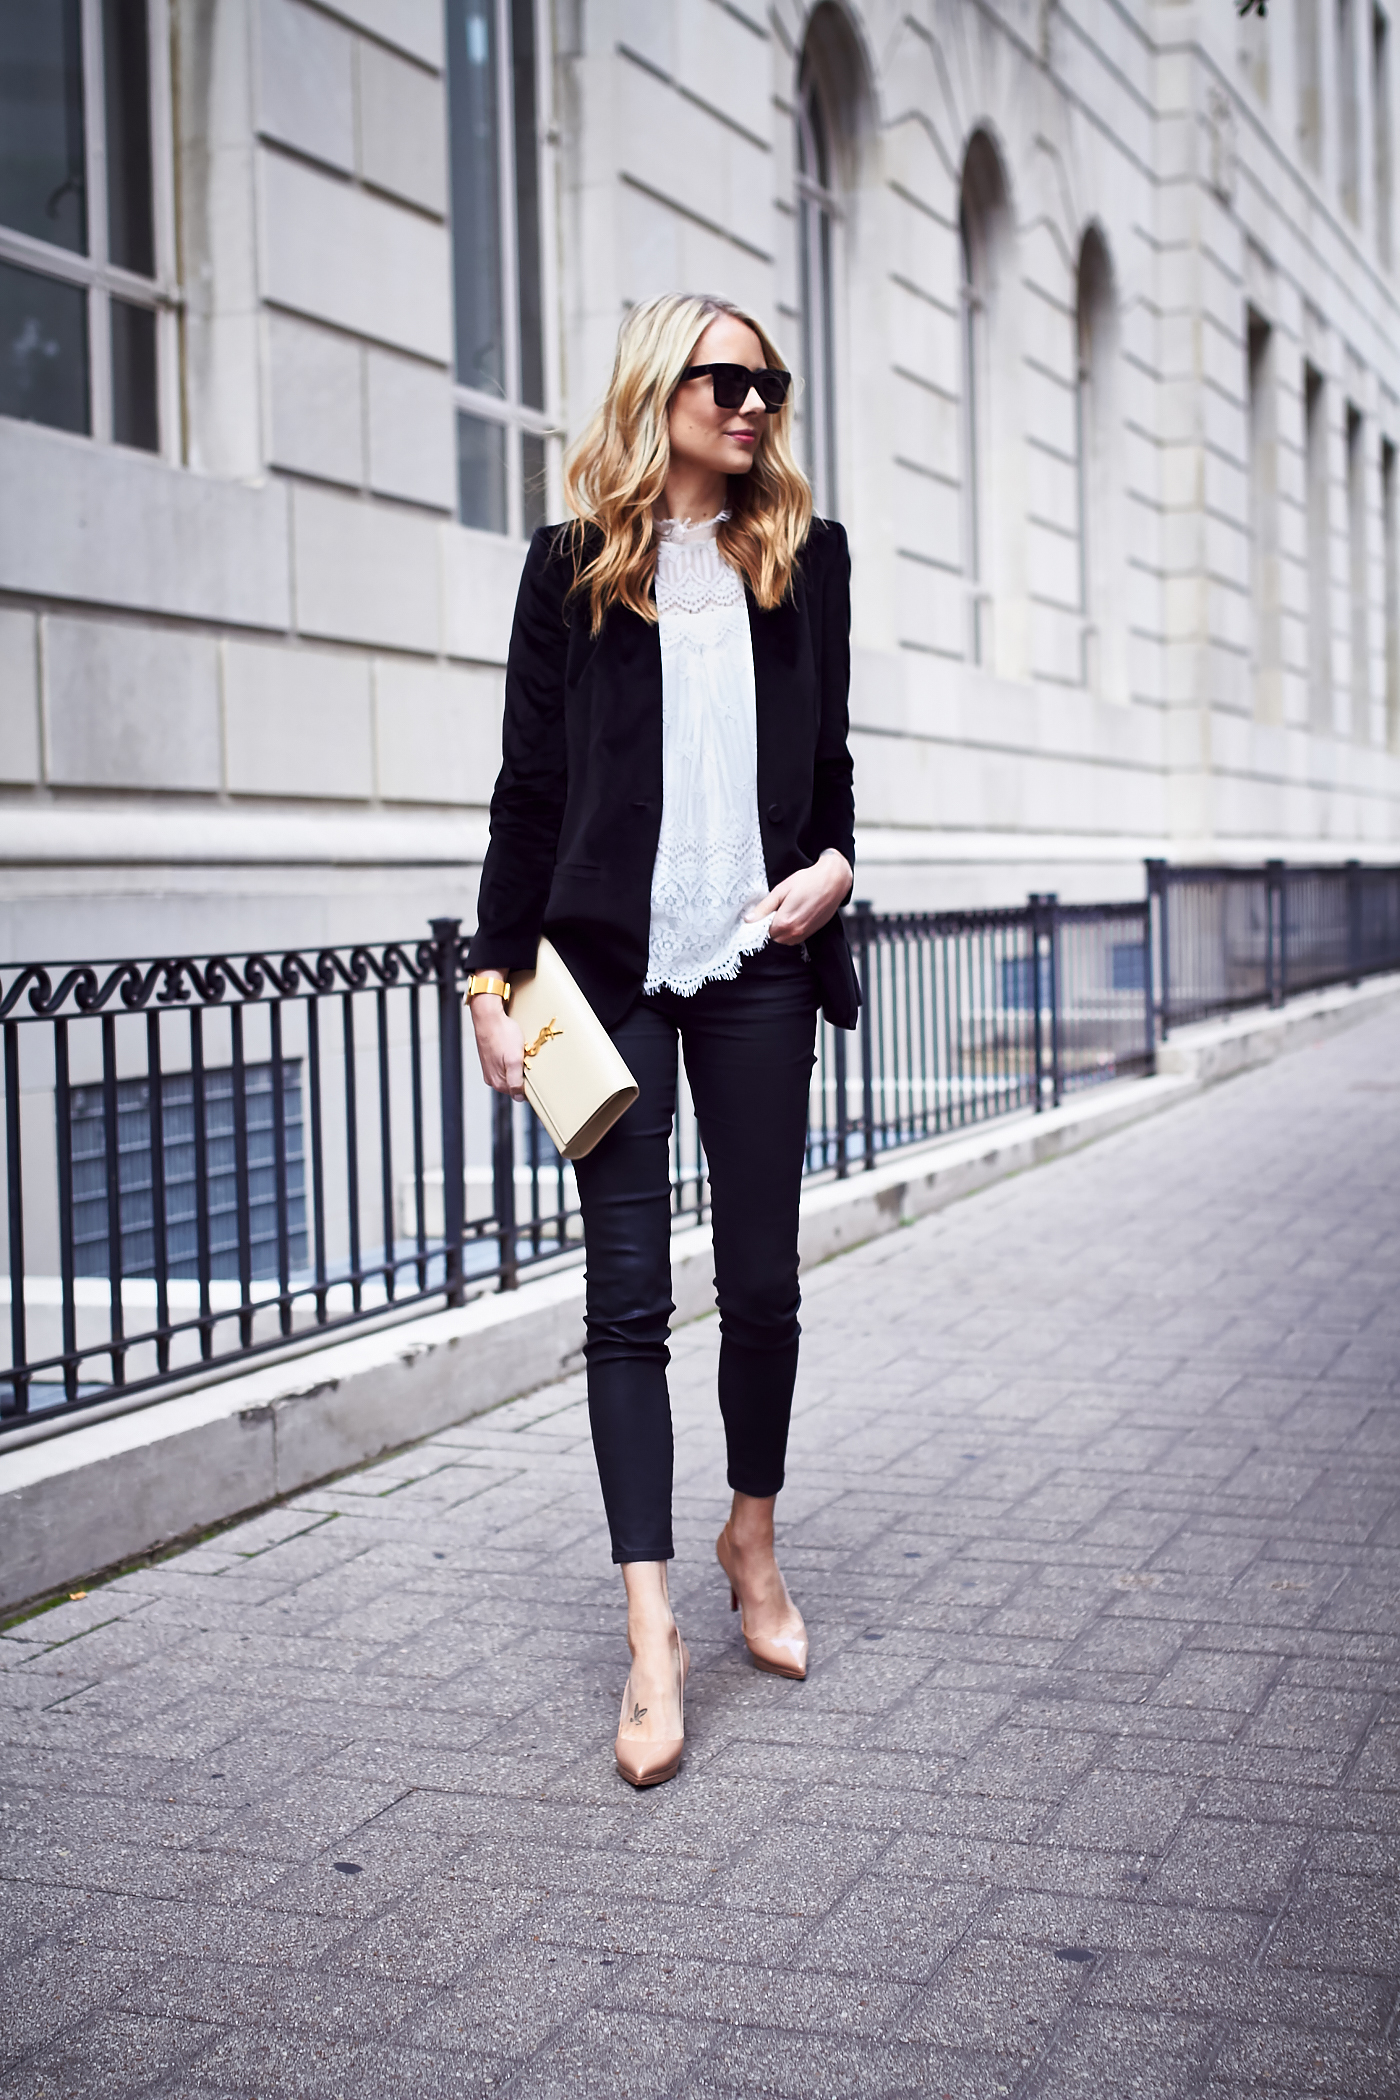 Fall Outfit, Holiday Outfit, White Lace Top, Black Velvet Blazer, Saint Laurent Clutch, Black Skinny Jeans, Nude Pumps